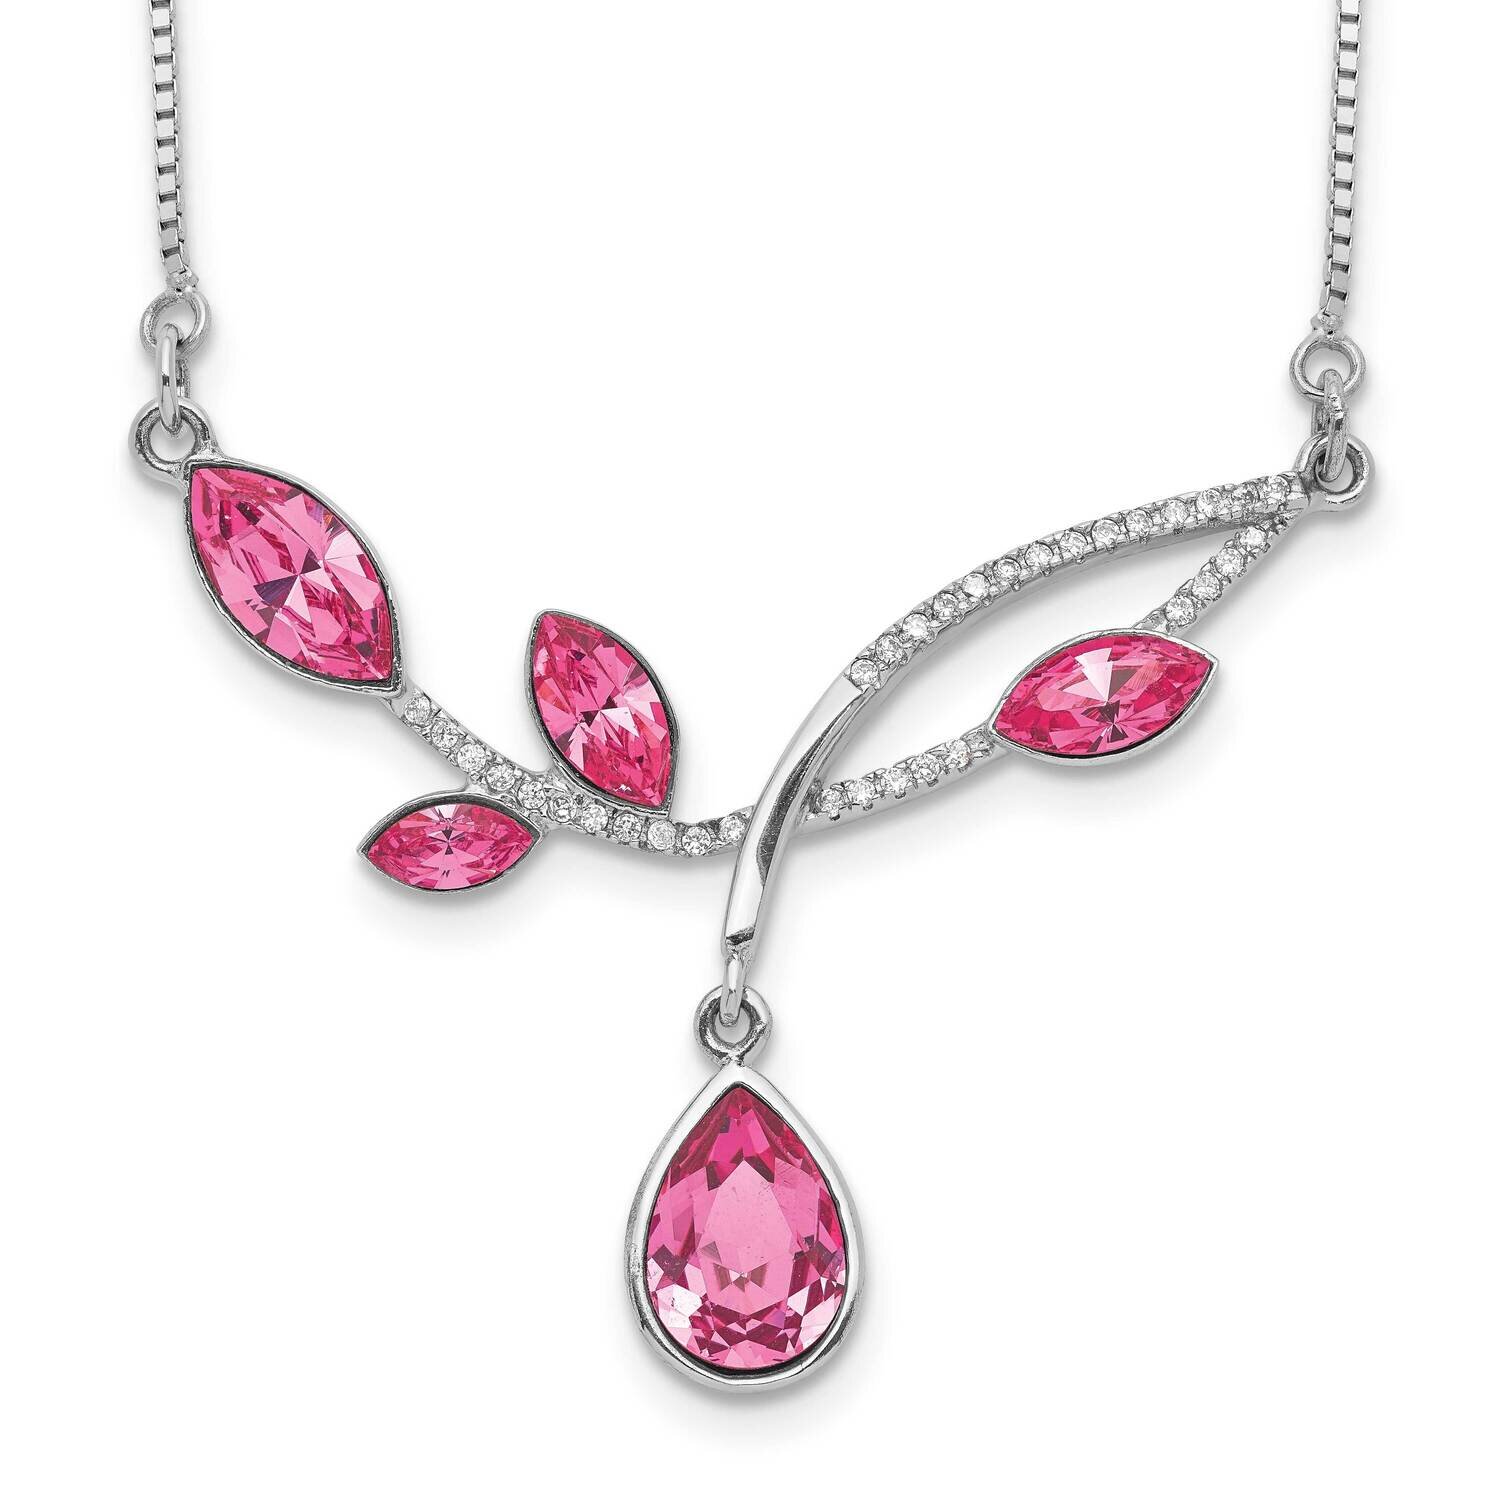 Pink Crystal Branch with 2 Inch Extender Necklace 16 Inch Sterling Silver Rhodium-Plated QG5550-16